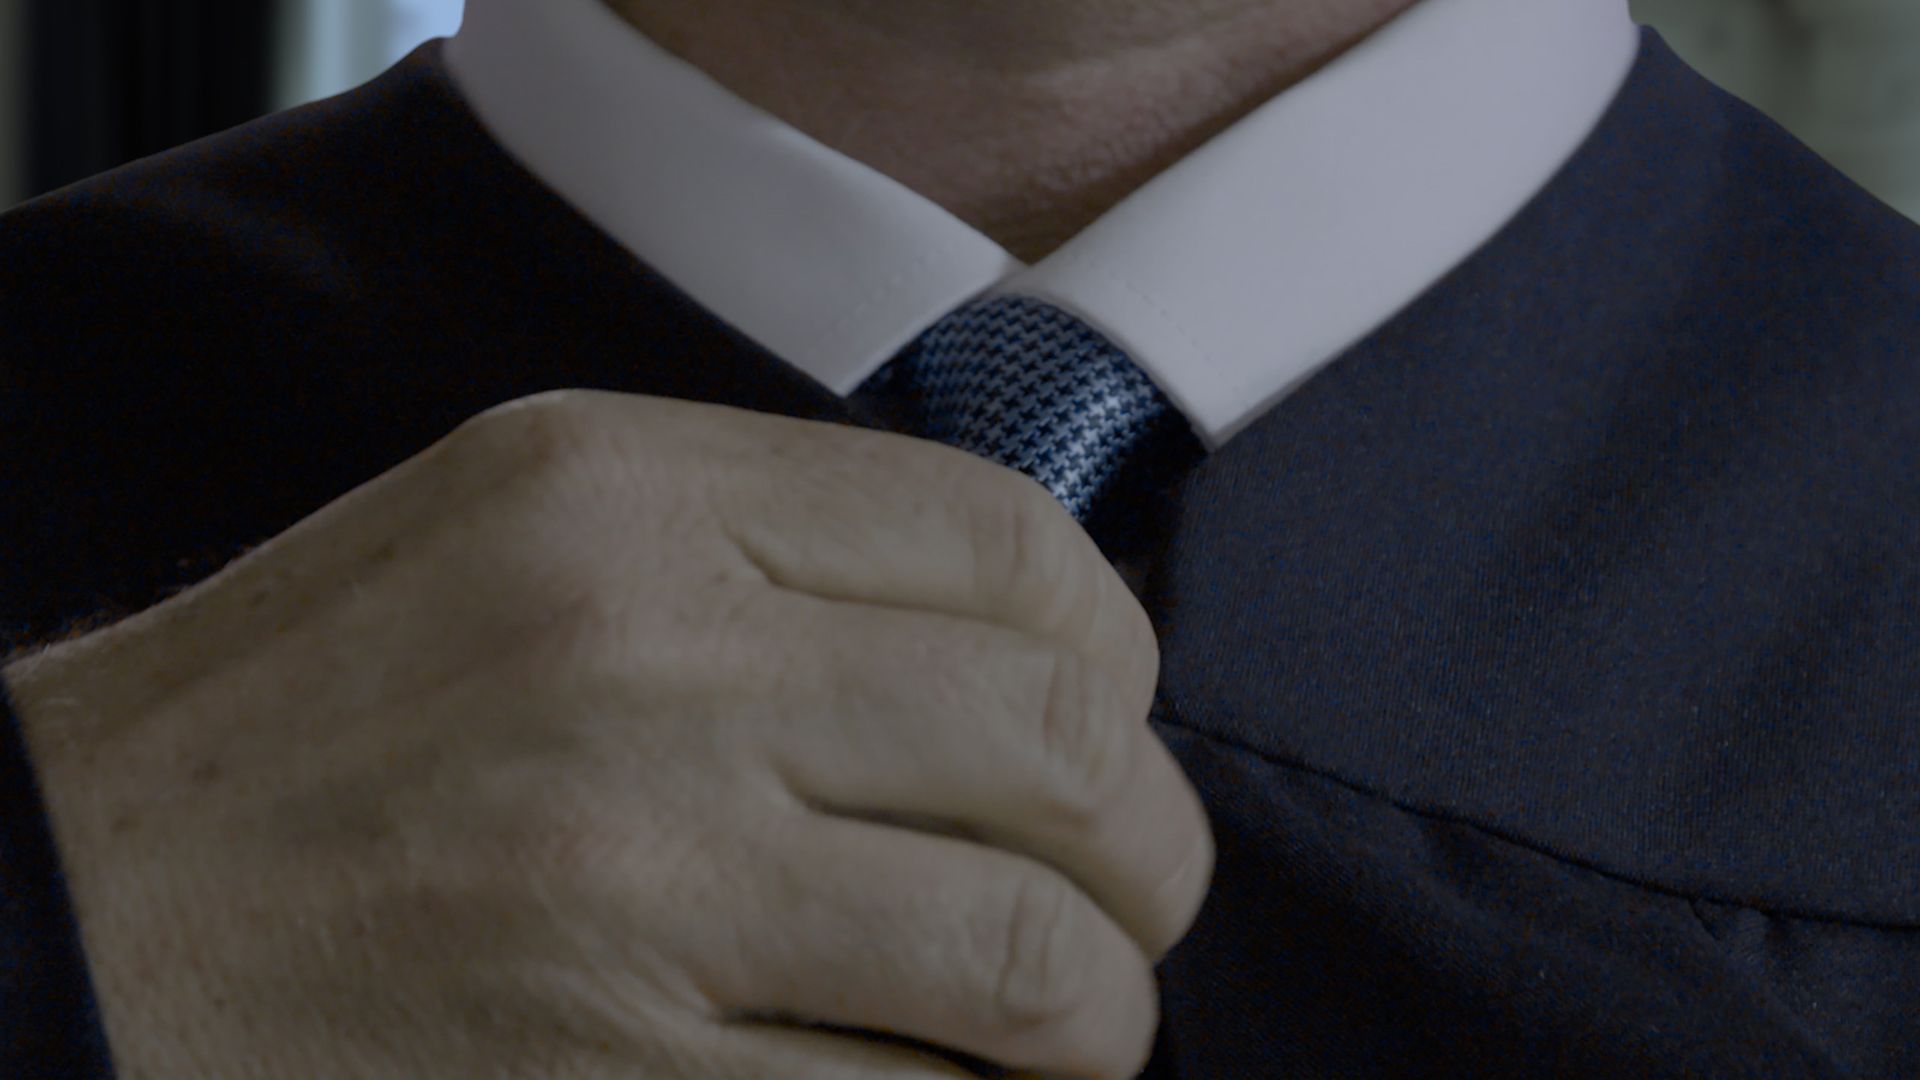 An image of a hand fixing a tie.